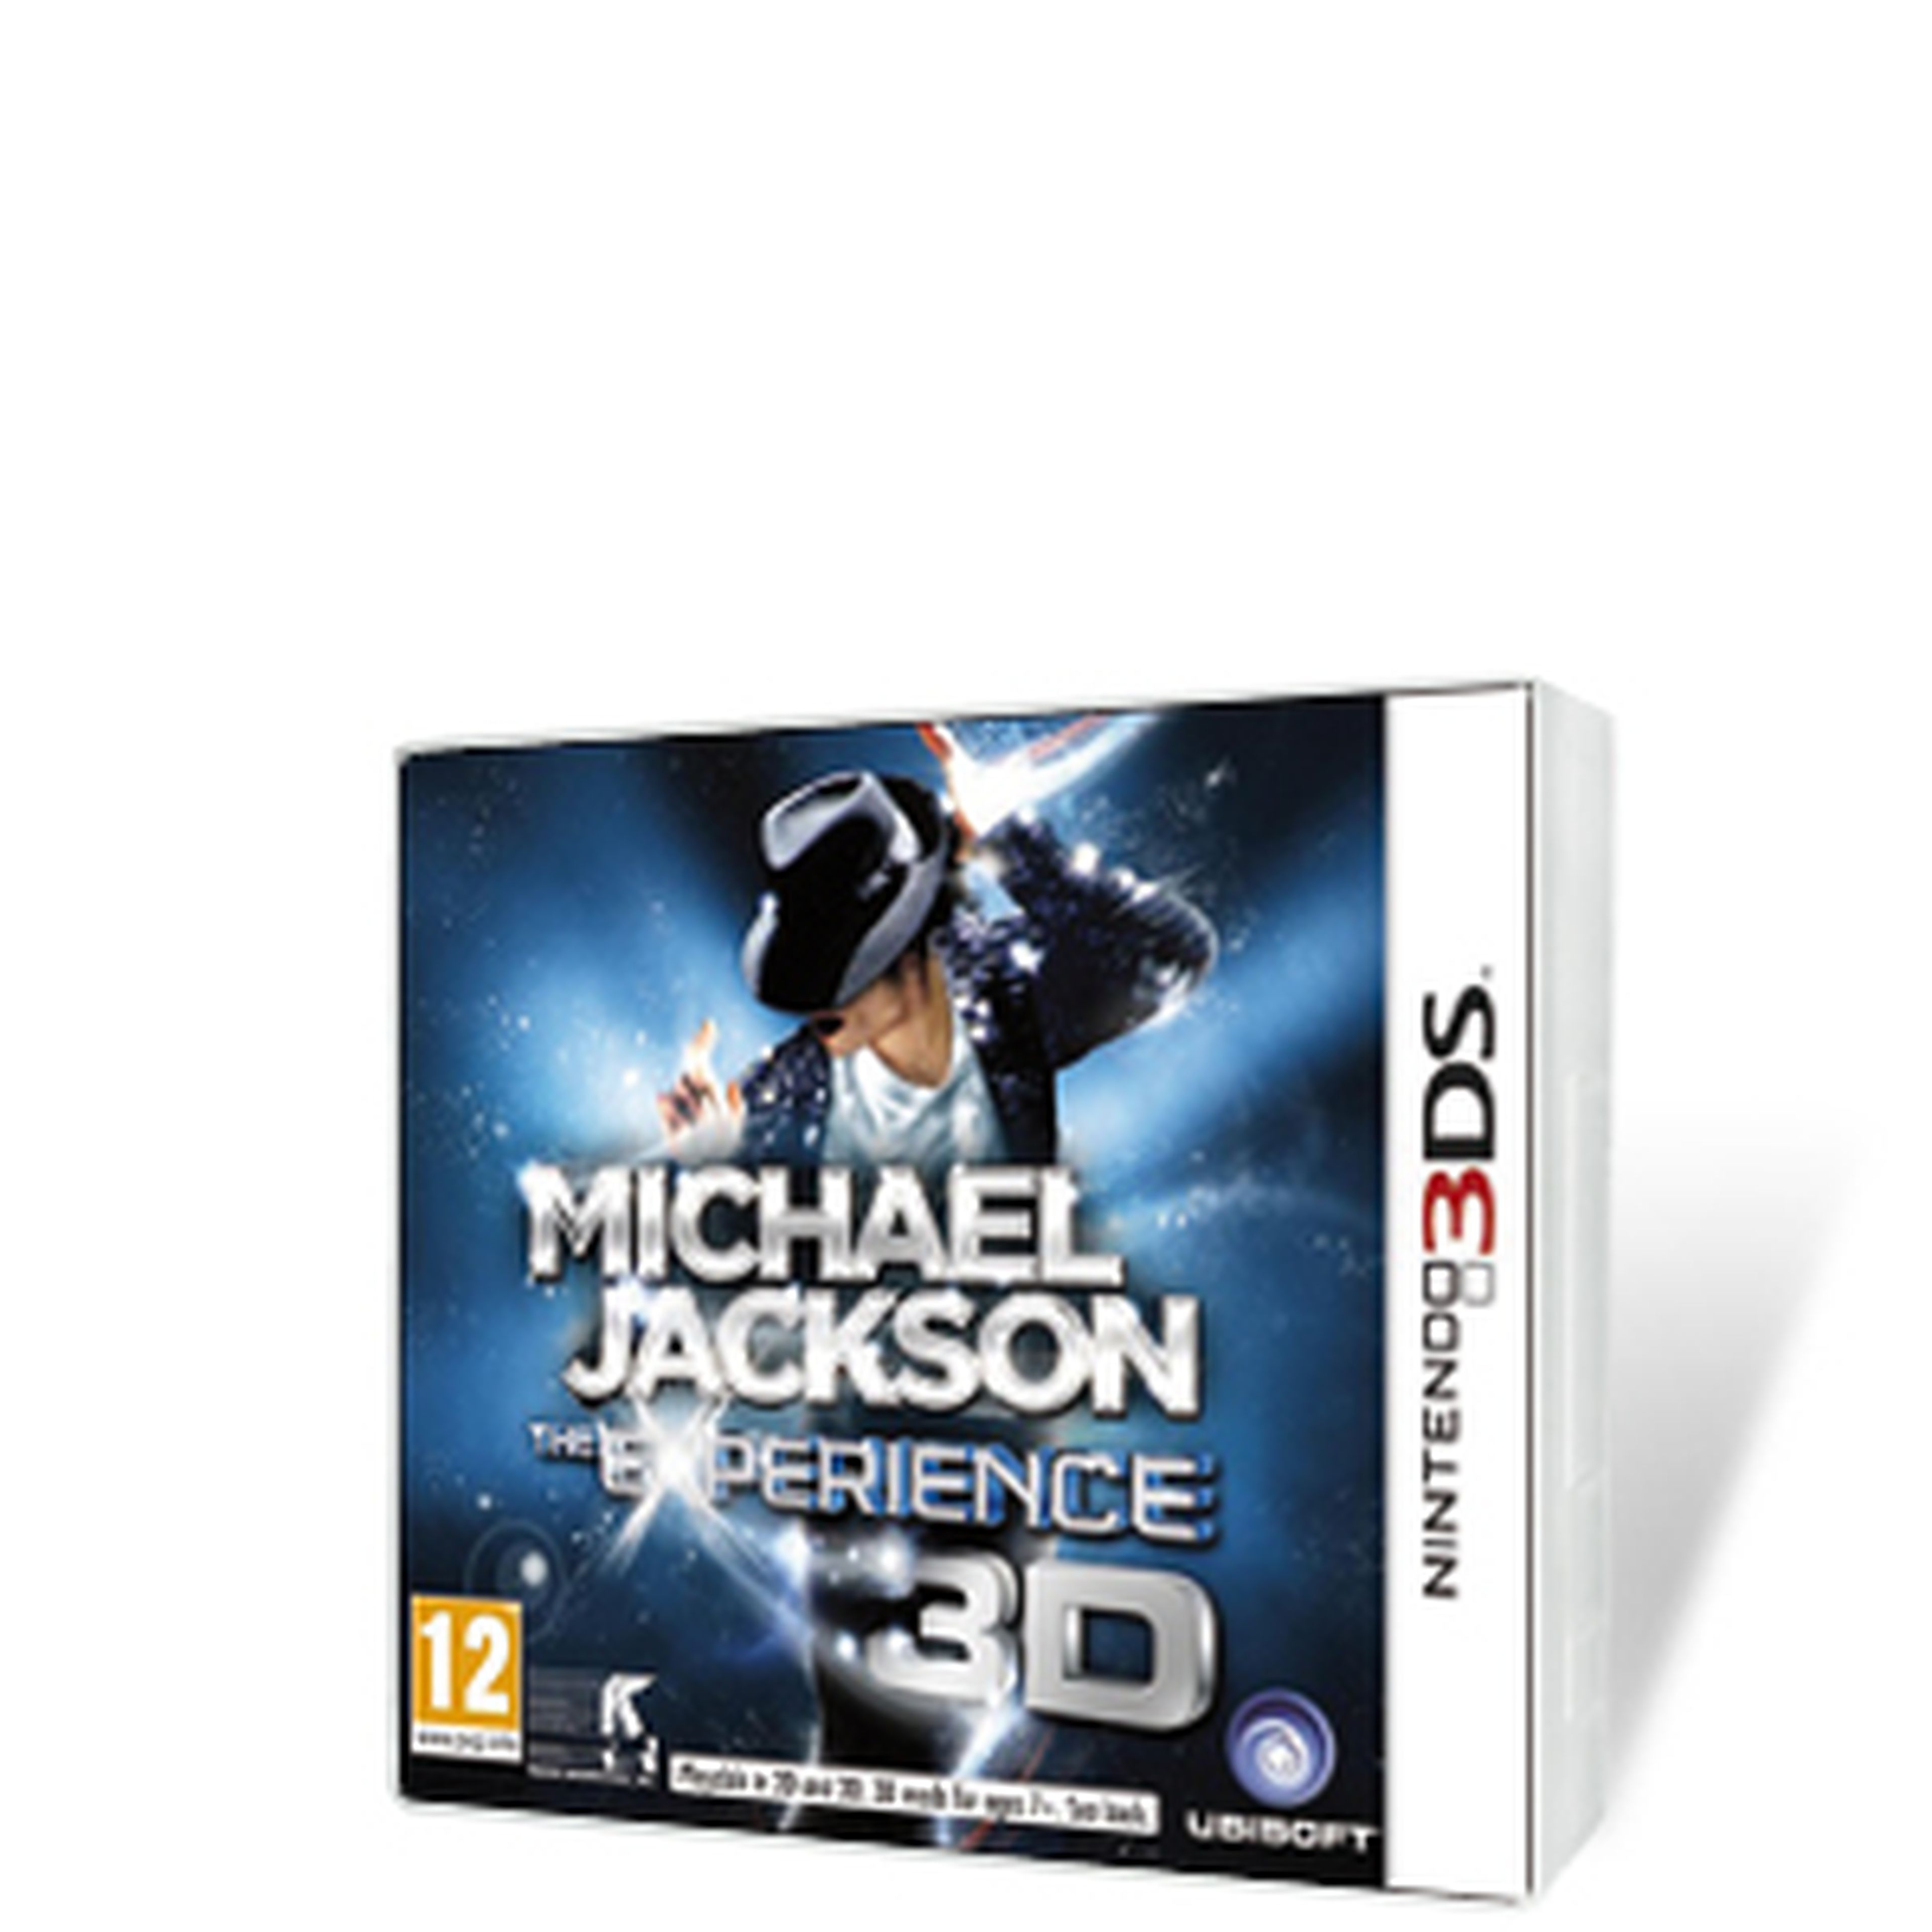 Michael Jackson The Experience para 3DS